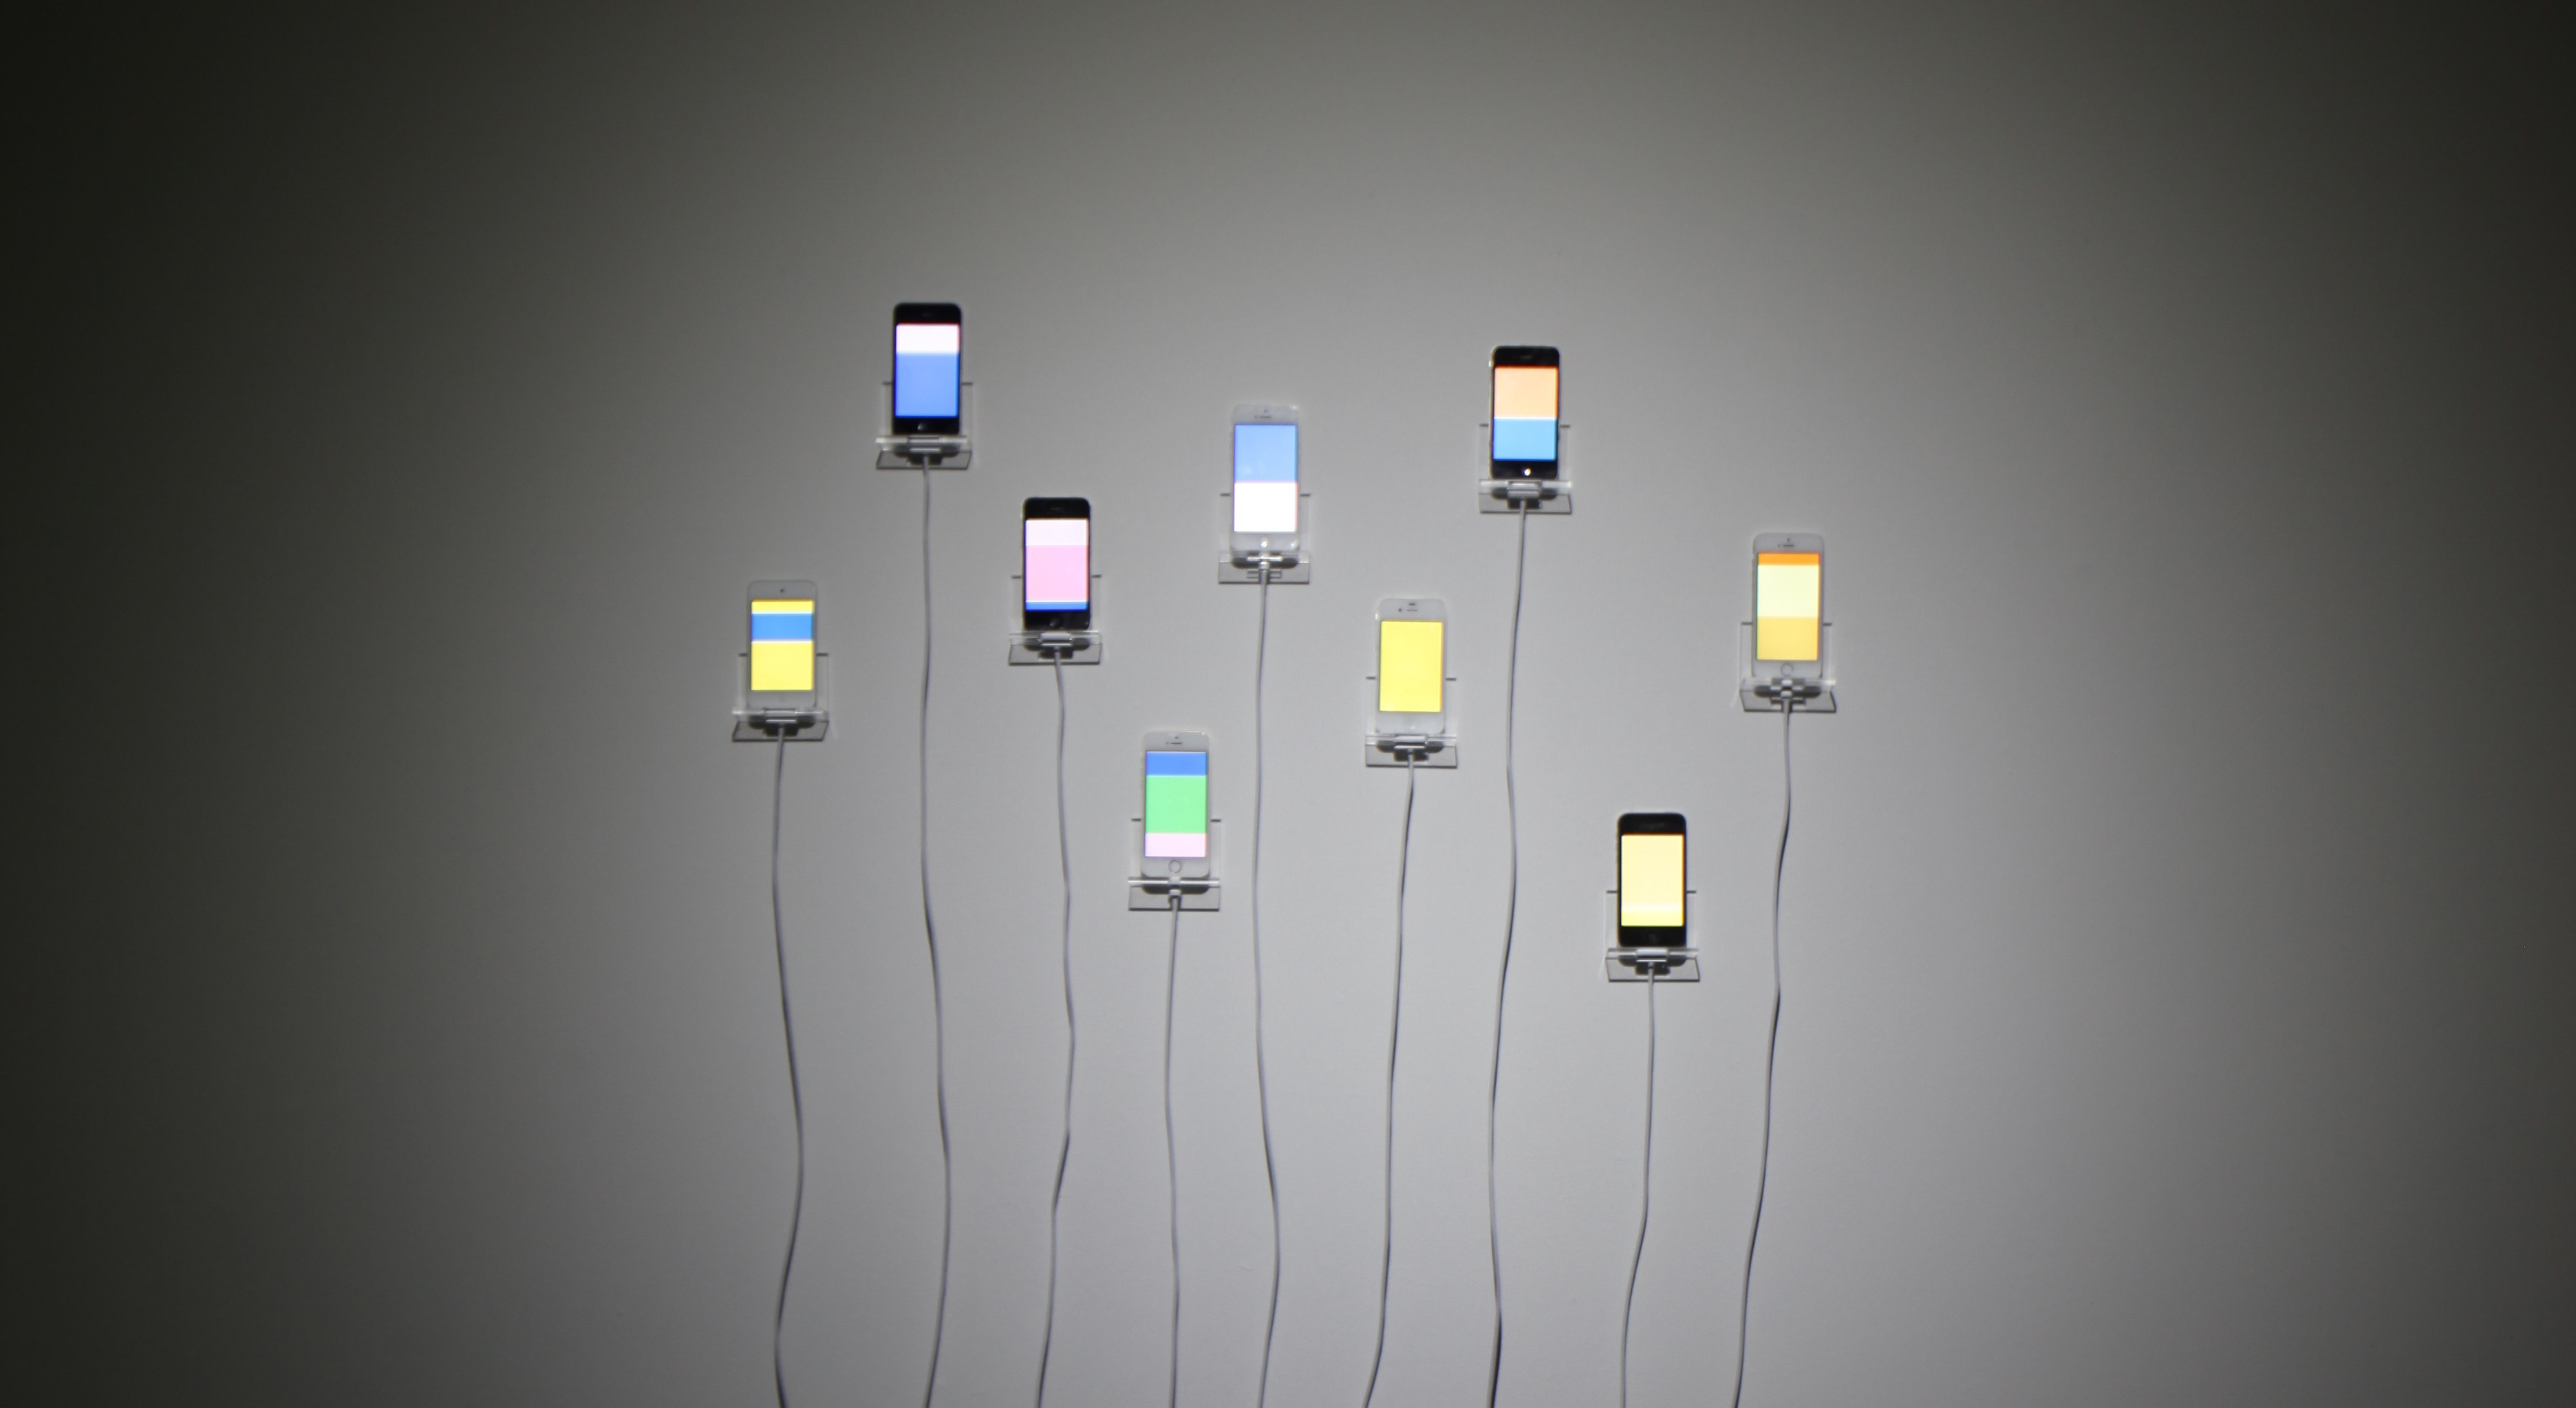 Nine iPhones mounted on the wall with nine unique motion sequences generated by different phone users